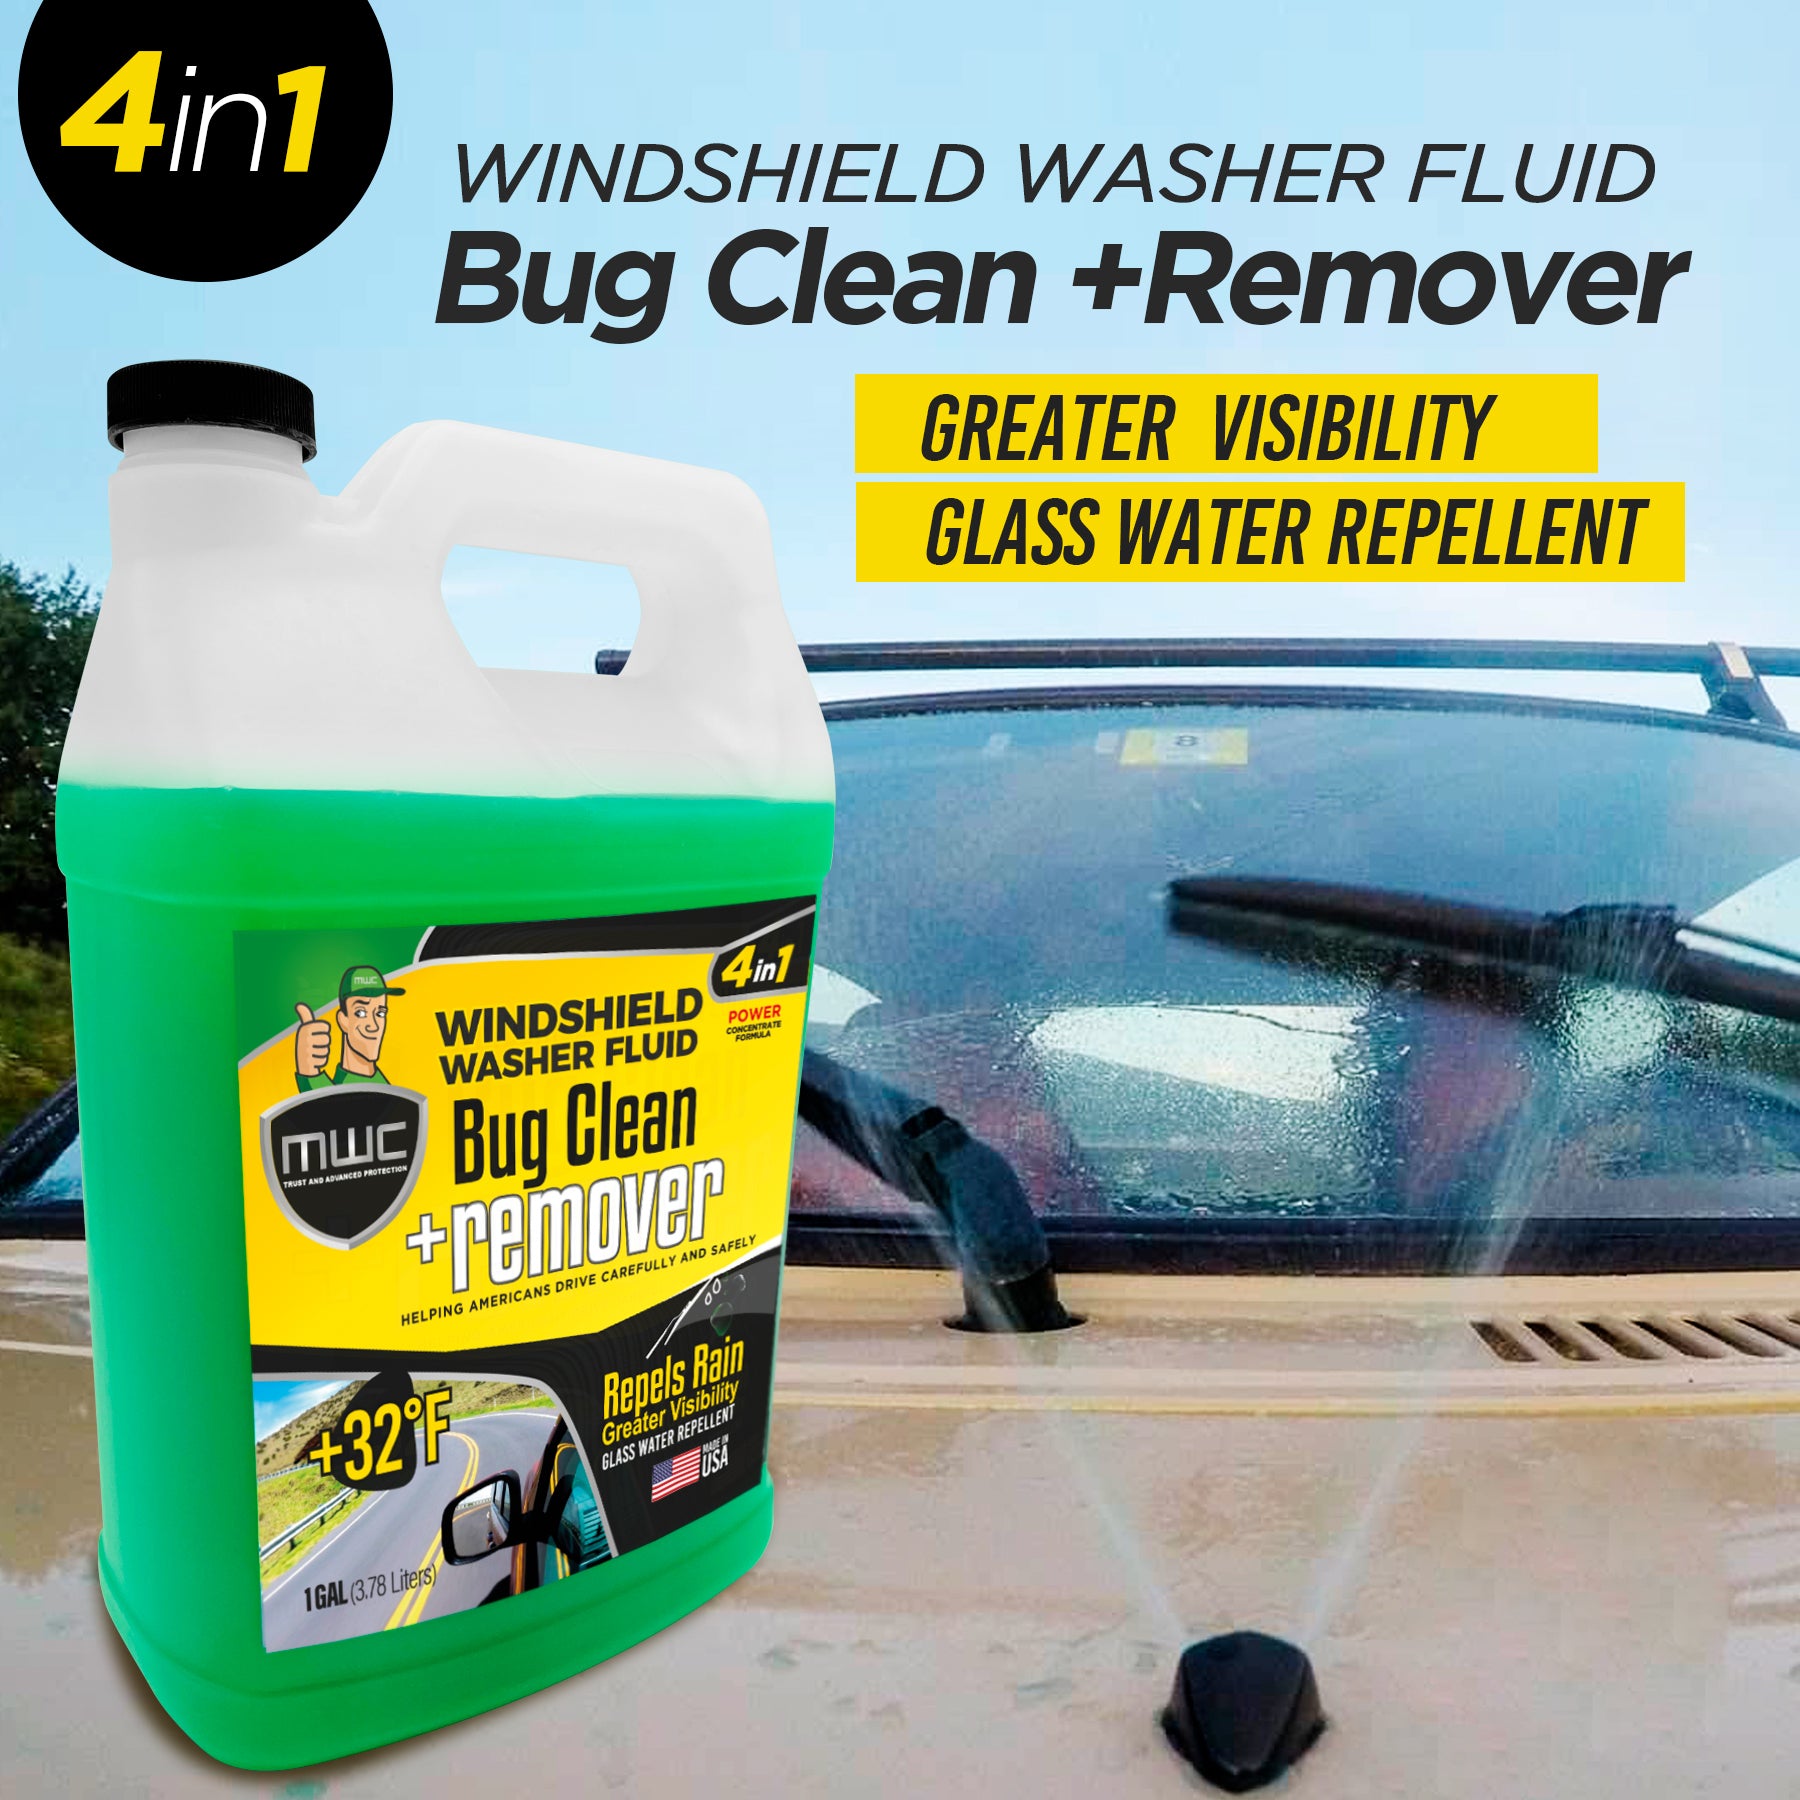 Car Windshield Washer Fluid: Benefits, Refill Techniques & More